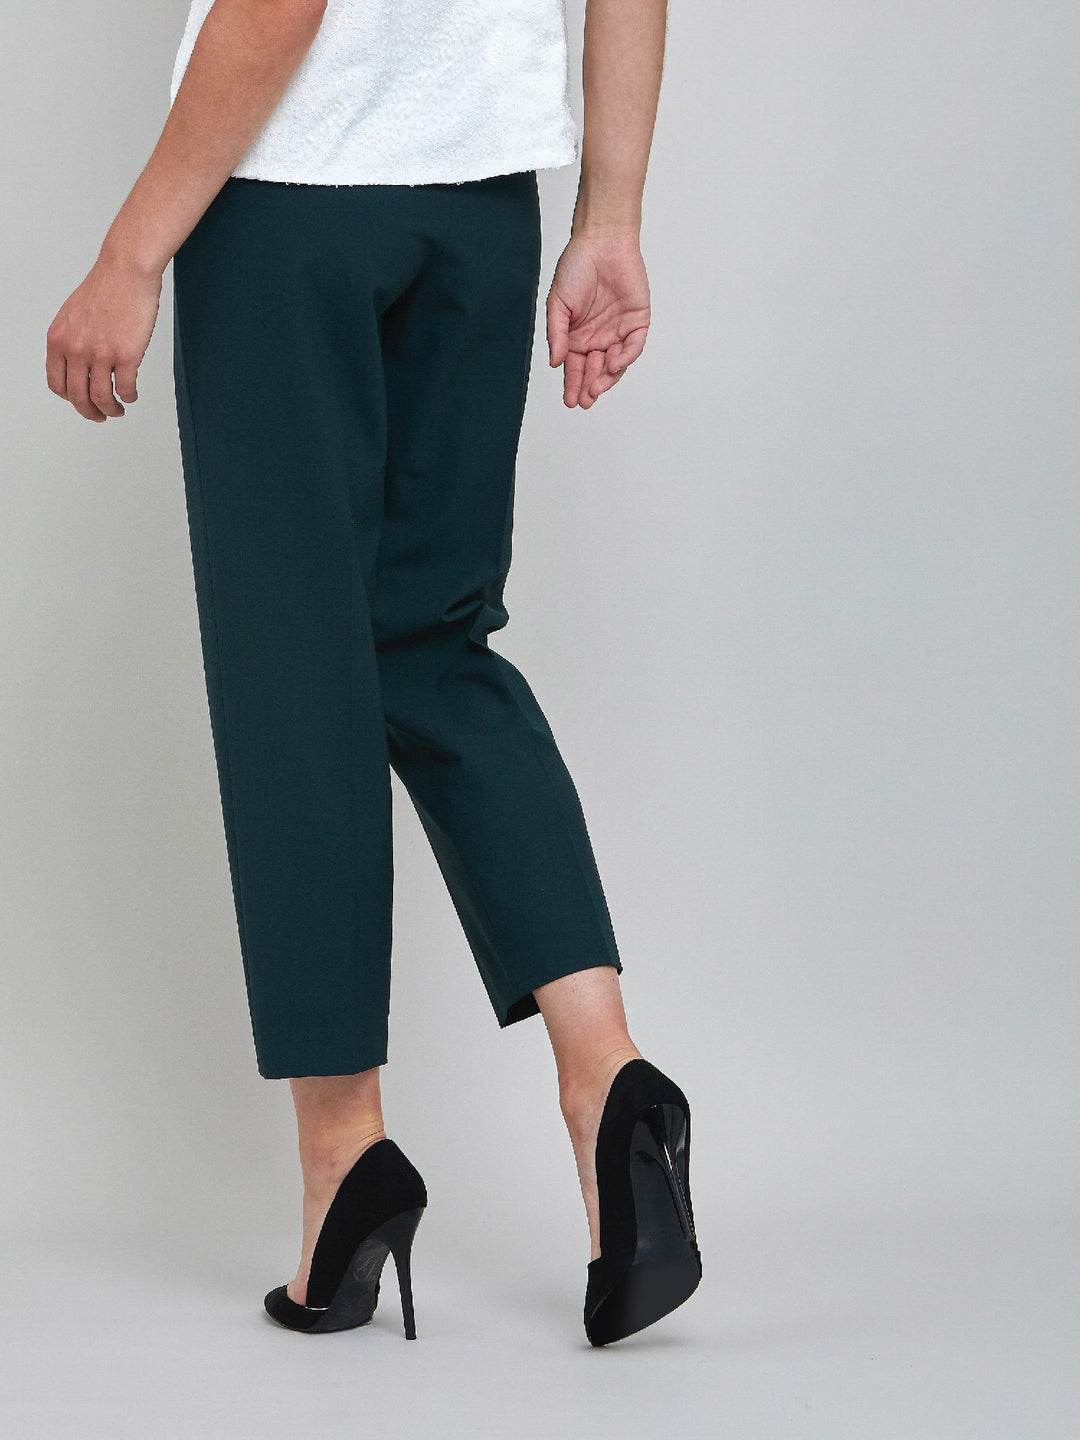 Investment-worthy, neat narrow-leg woolen trousers with a hint of stretch. A wardrobe staple and HMcA classic. This signature fabric is made from sustainability sourced fibers with a hint of elastane to ensure comfort and ease of movement.